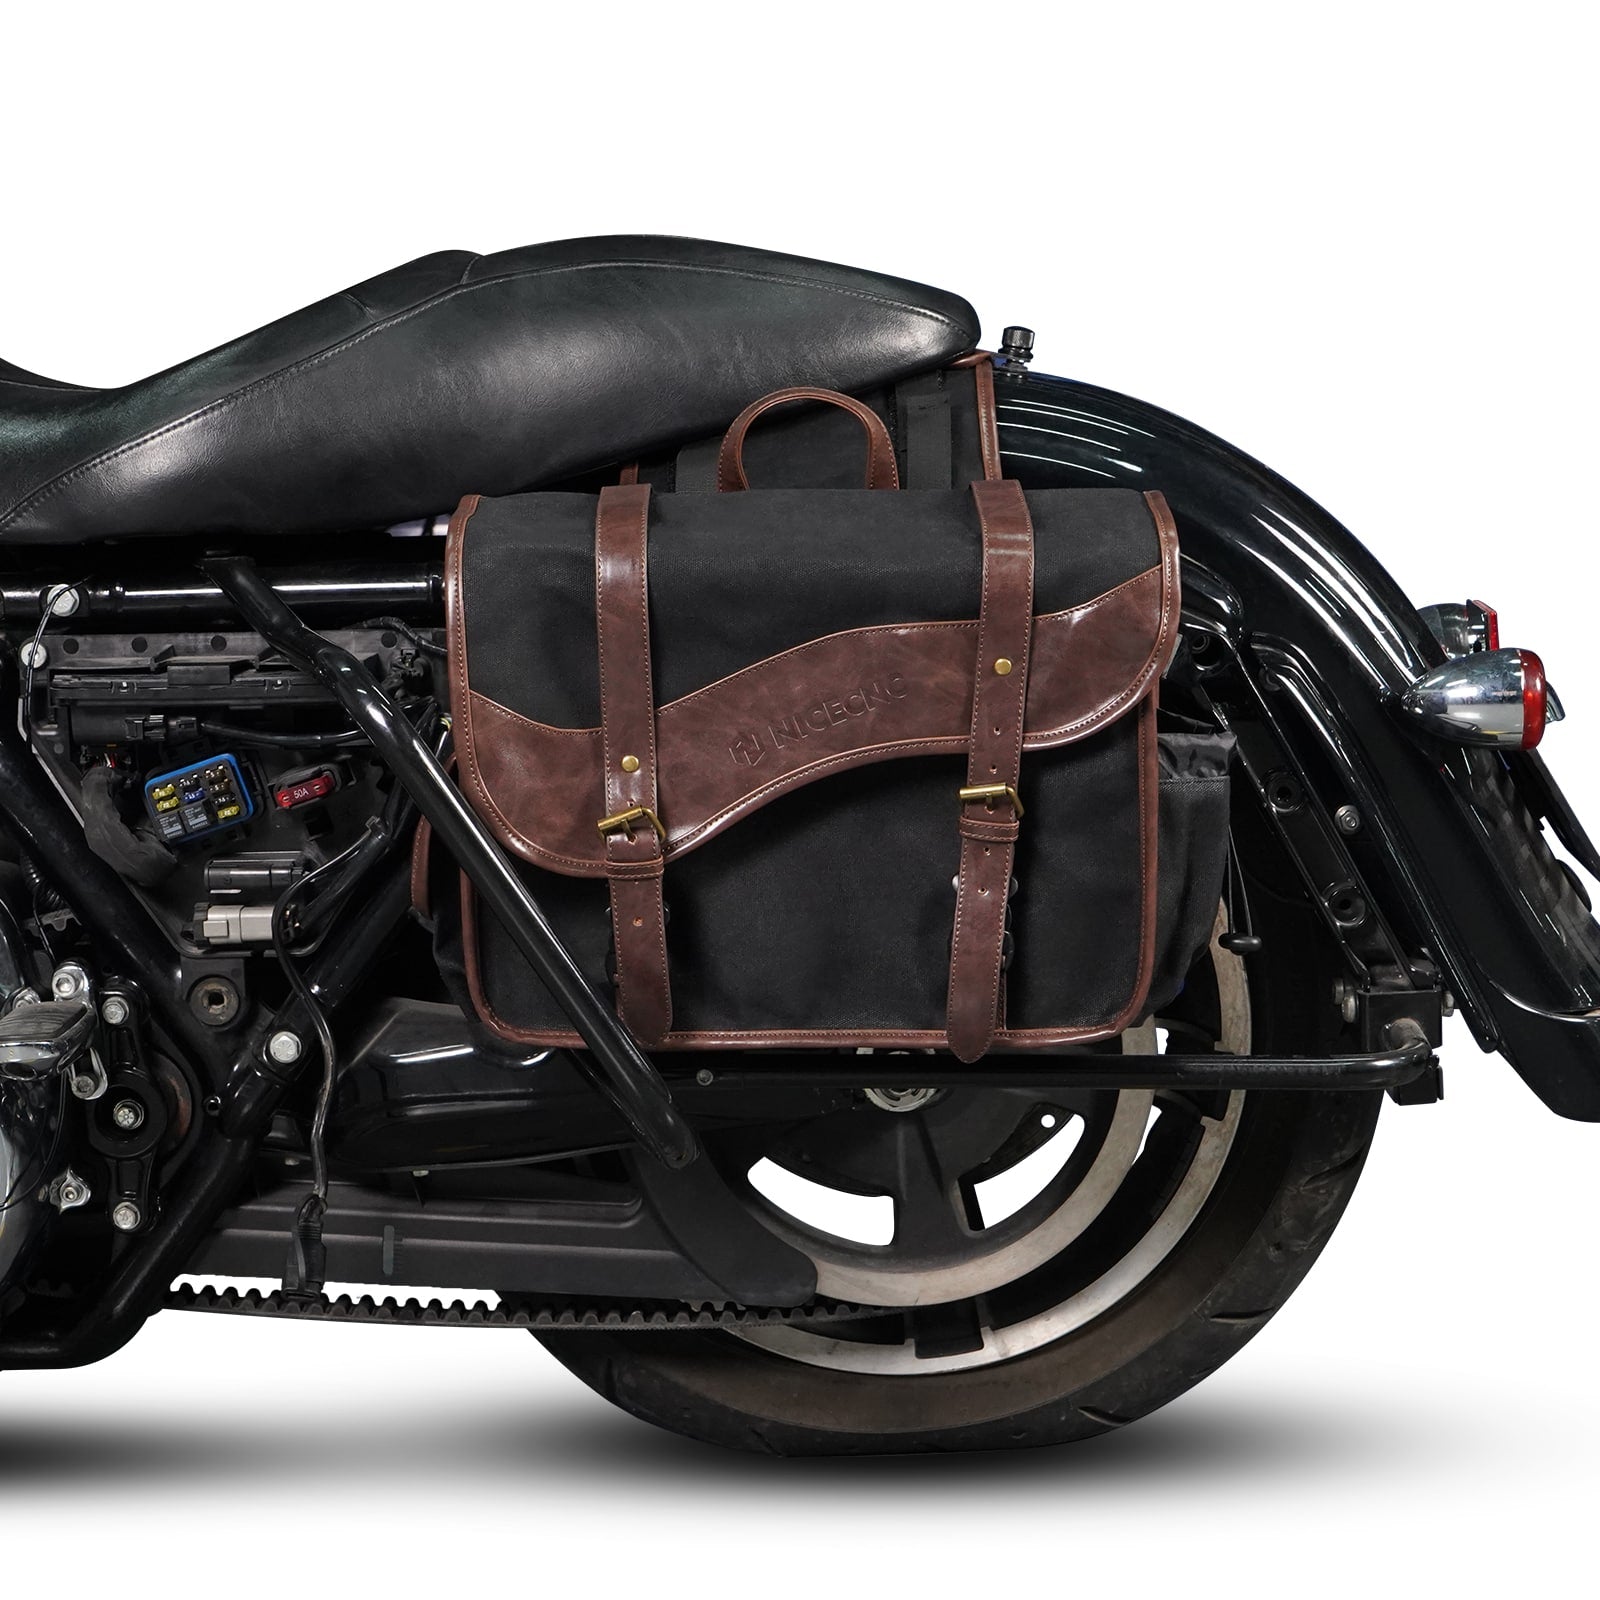 Waxed Canvas Motorcycle Saddle bags Panniers Side Throw Over Saddle Bags